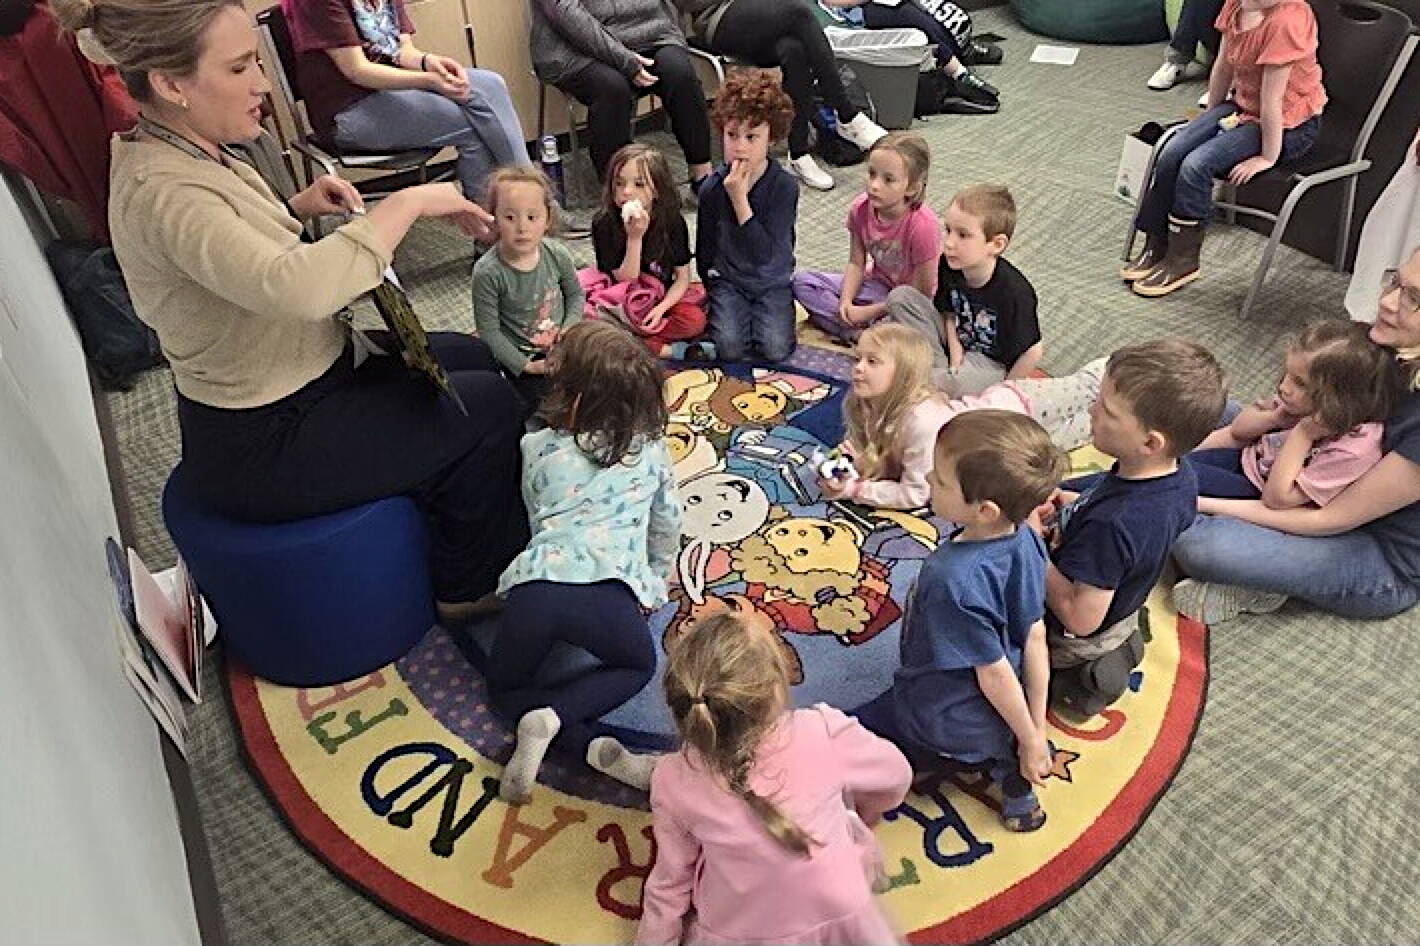 Students from Juneau Community Charter School listen to a story at the Skagway Public Library. (Photo provided by Clint Sullivan)